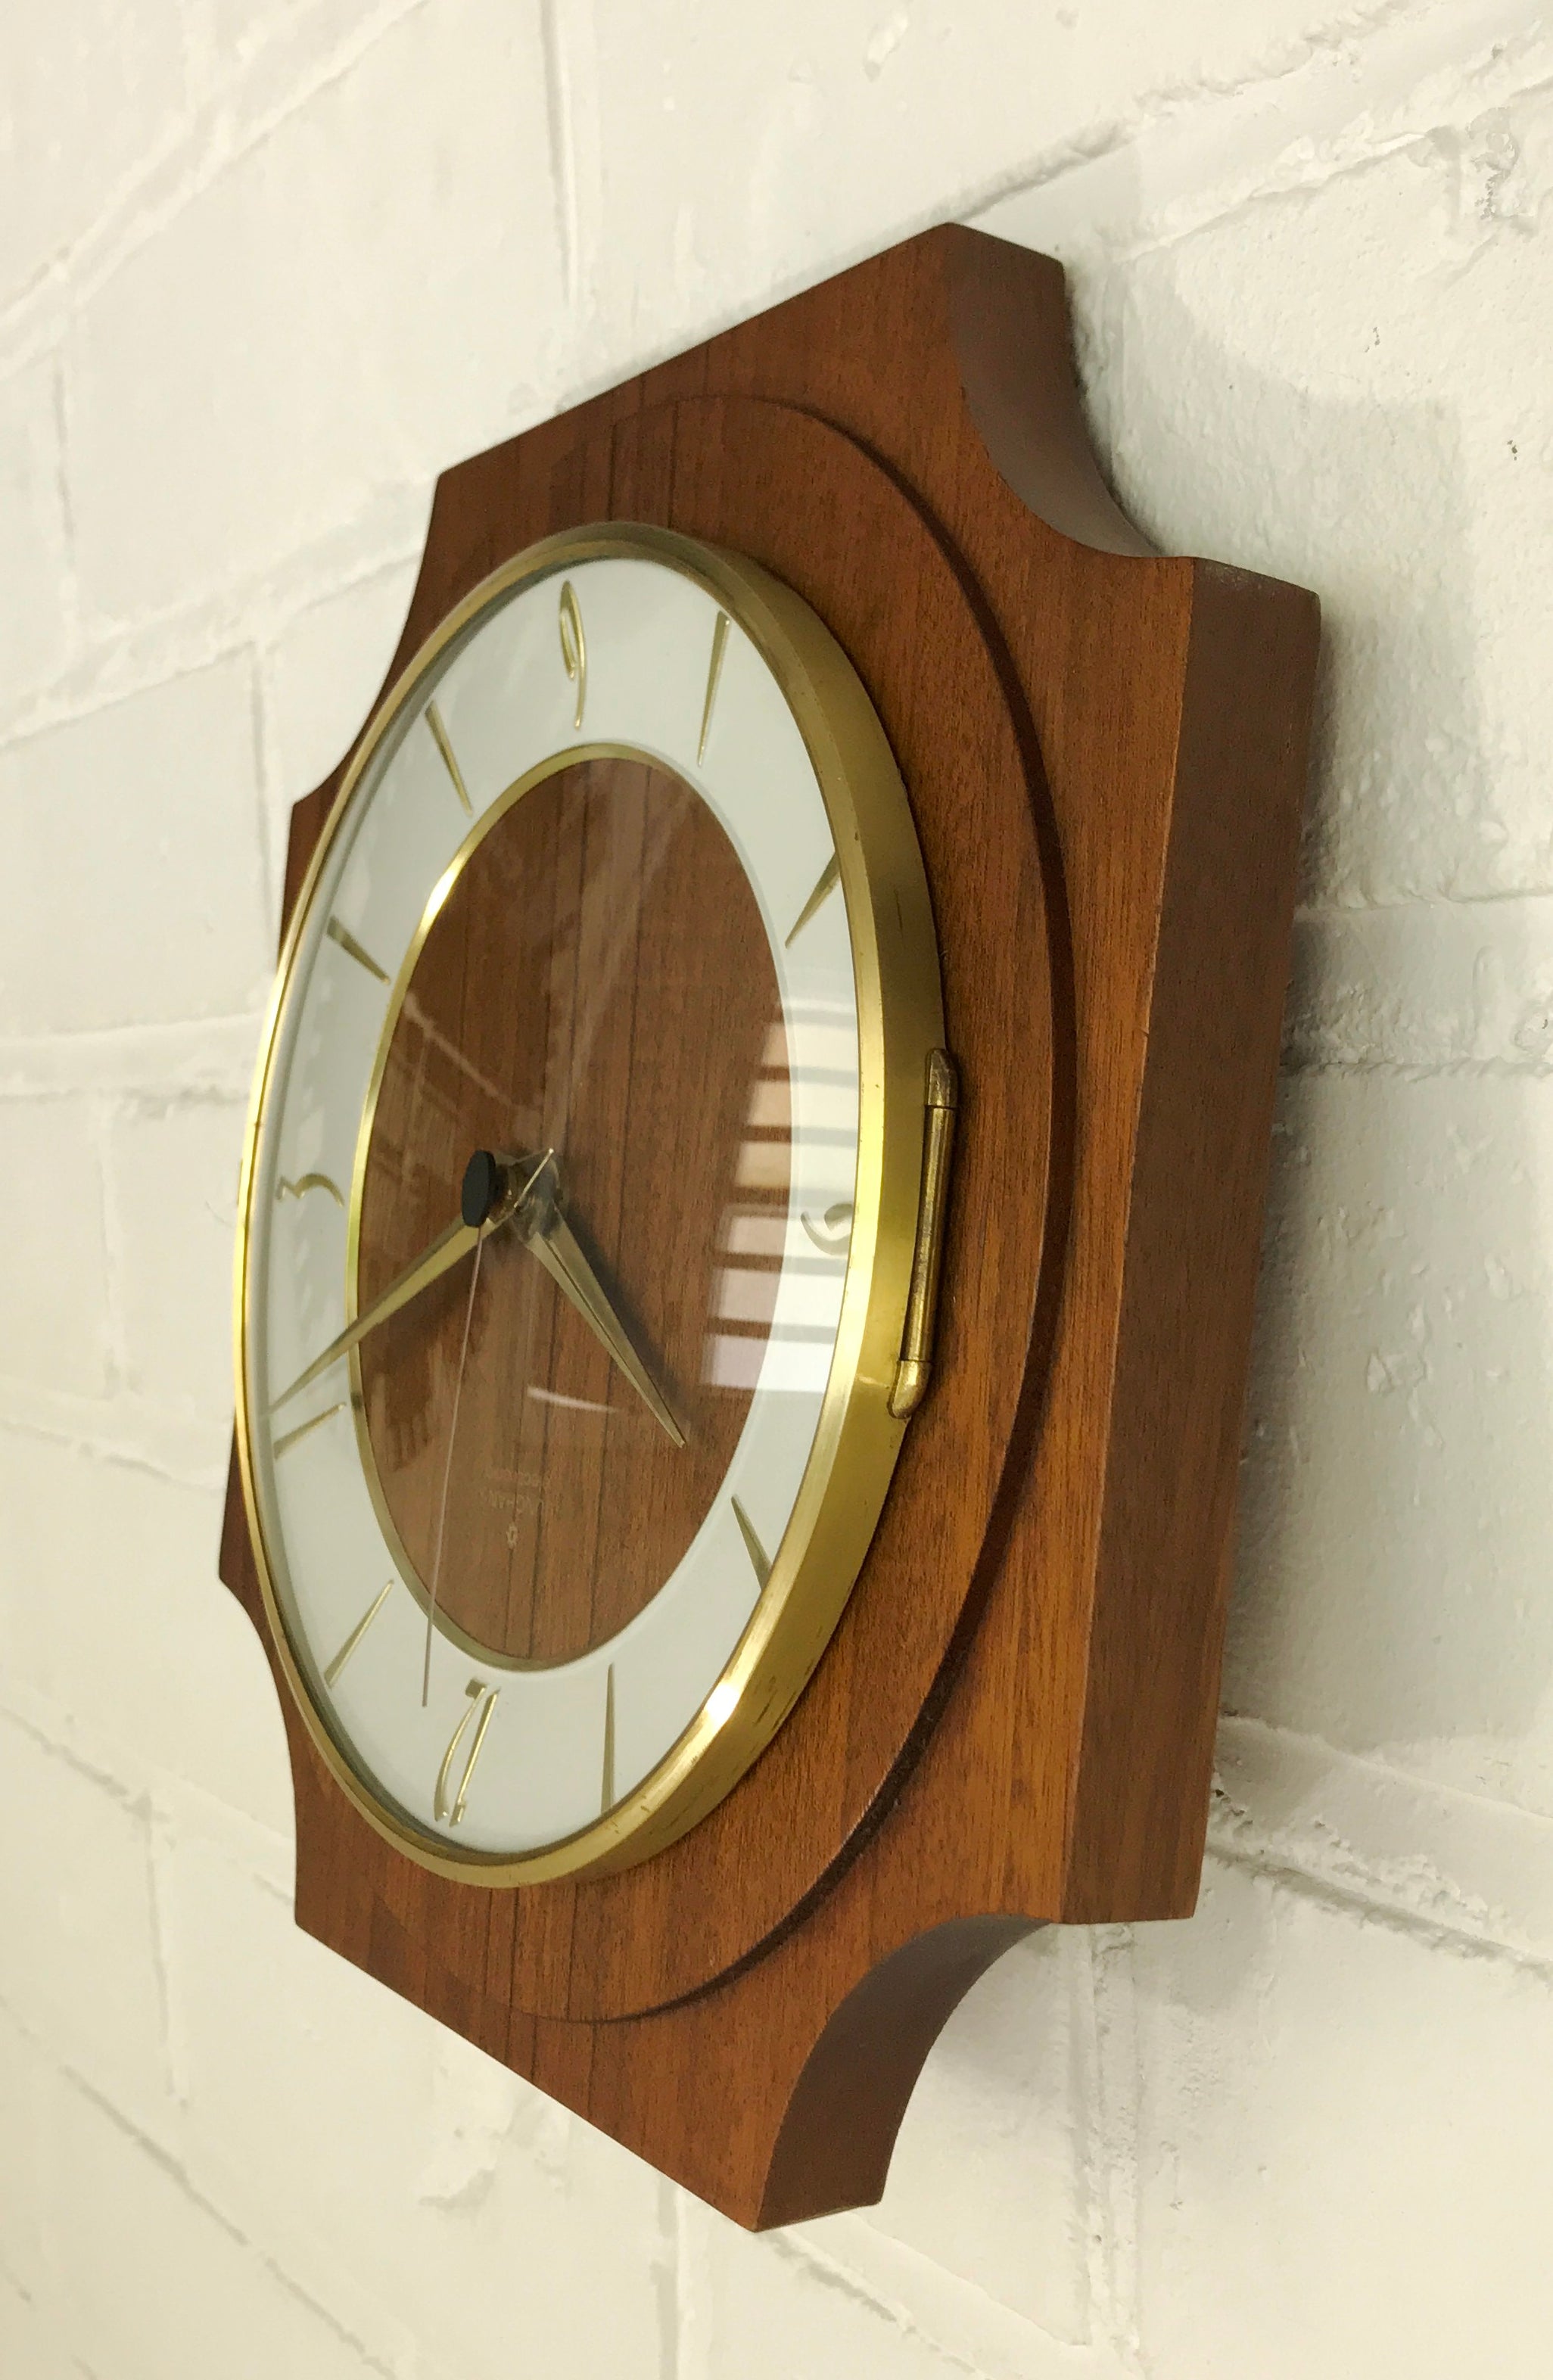 Vintage JUNGHANS Battery Wall Clock | eXibit collection